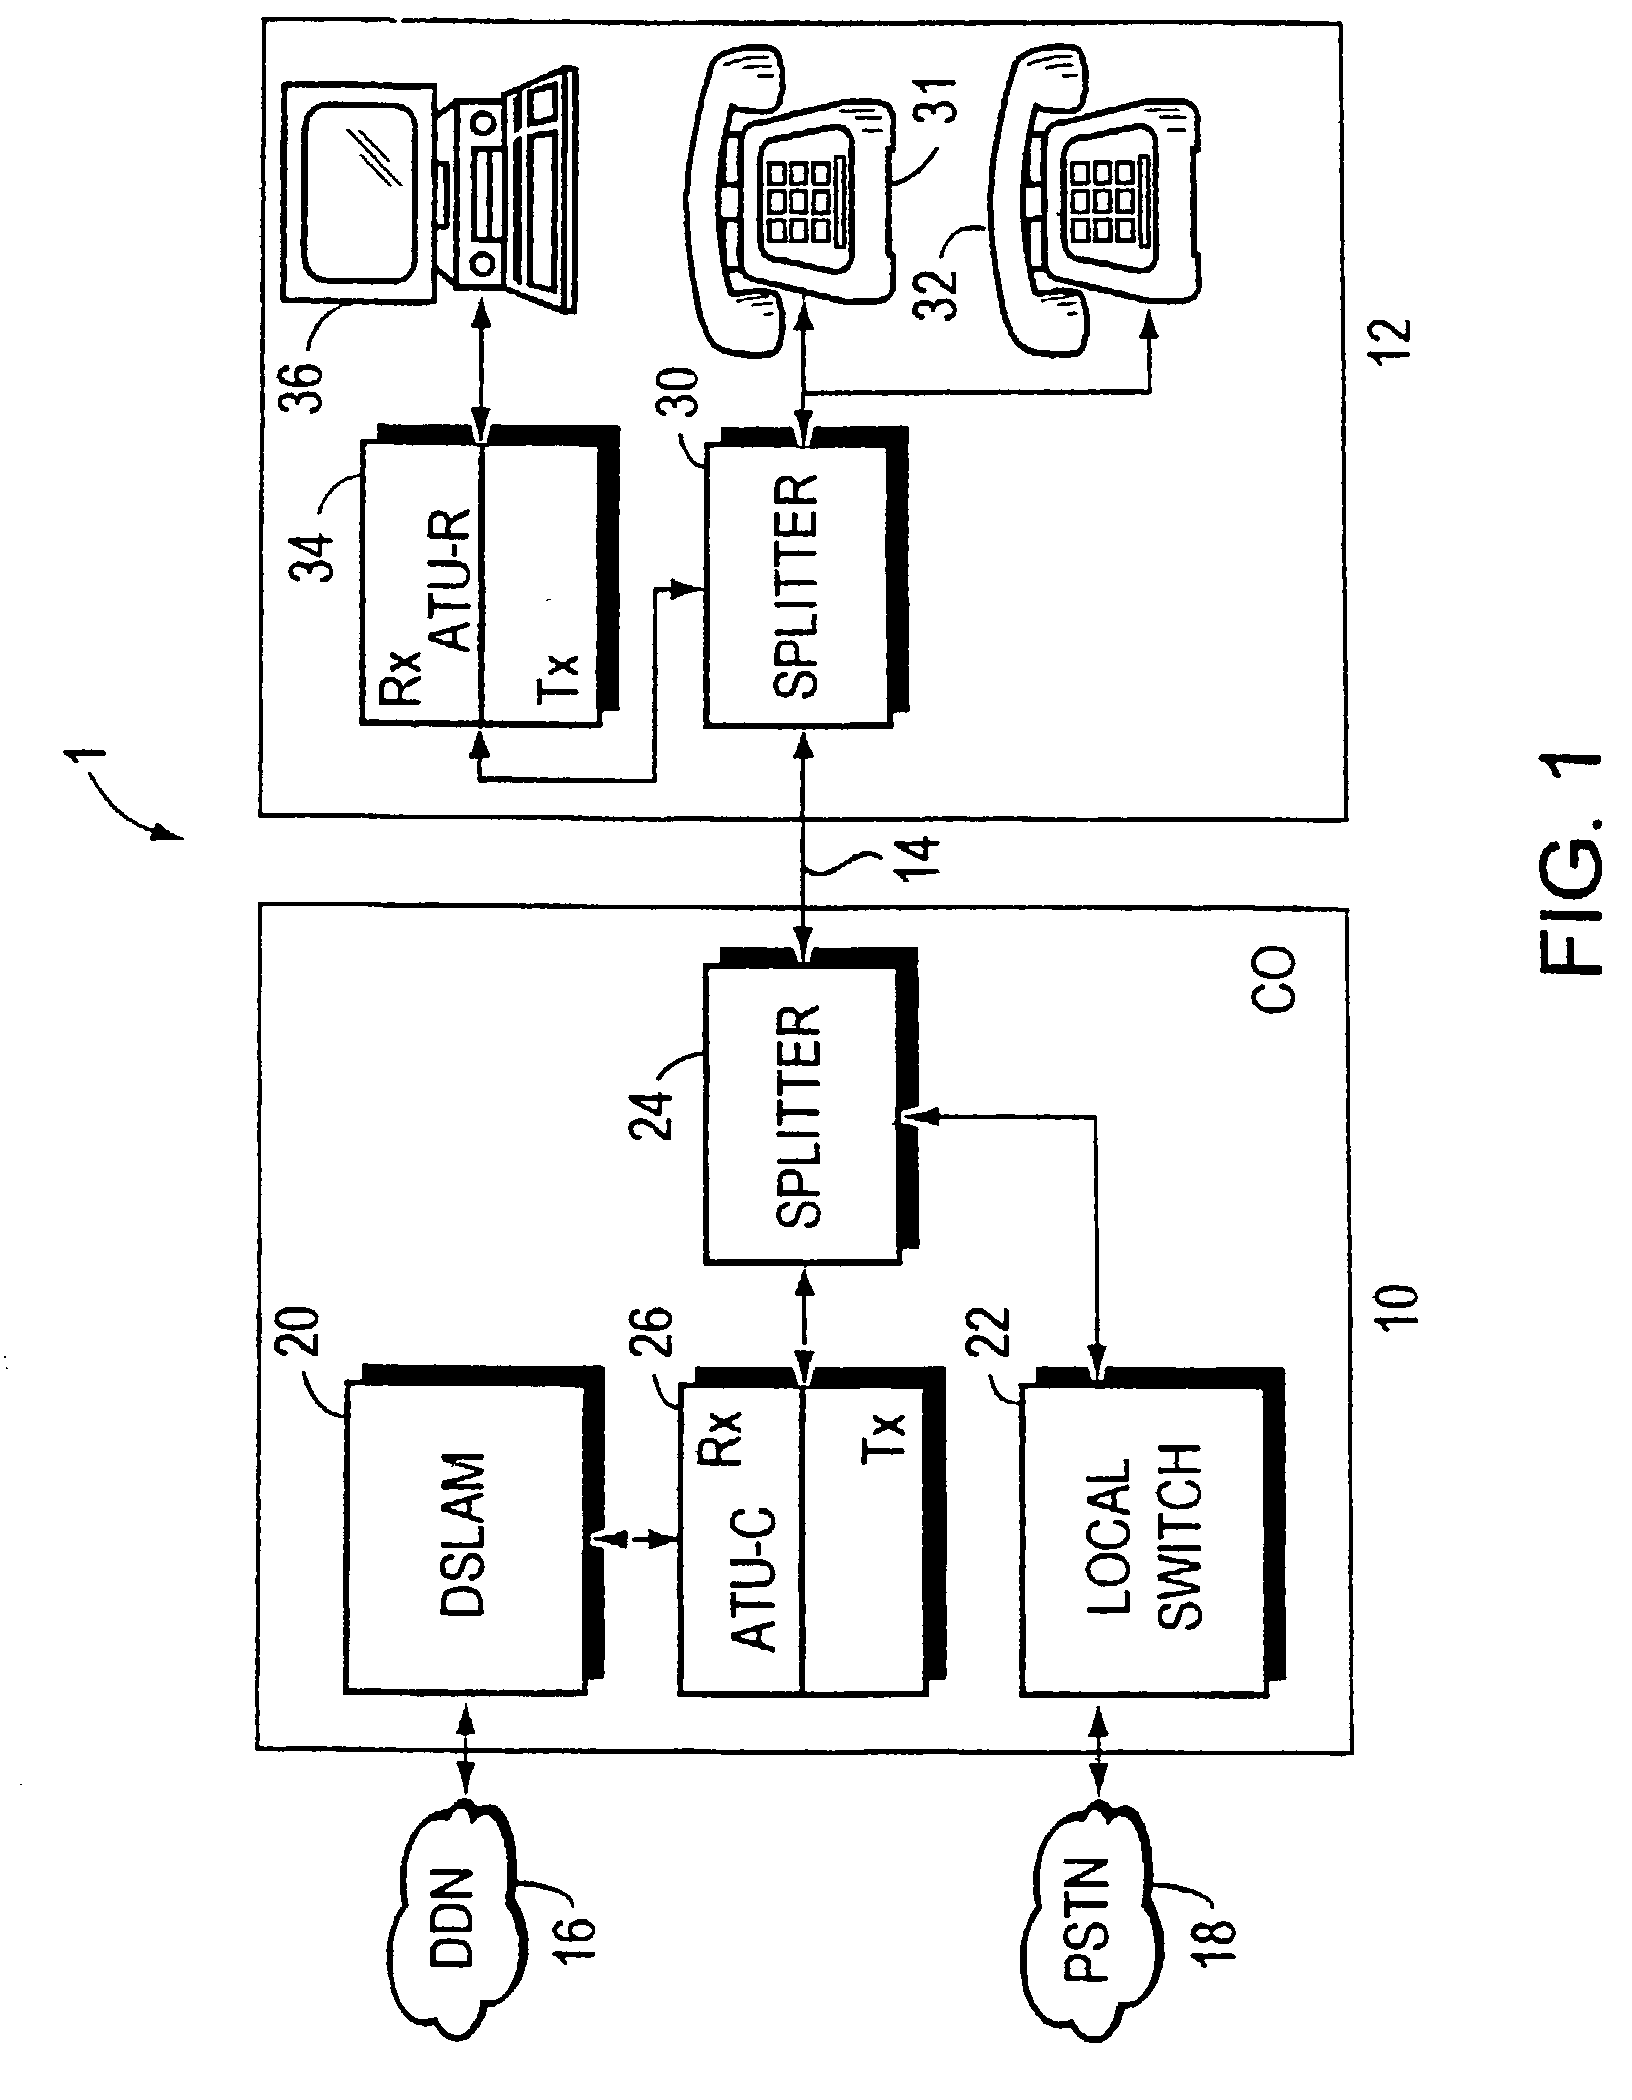 Multicarrier communication with variable overhead rate